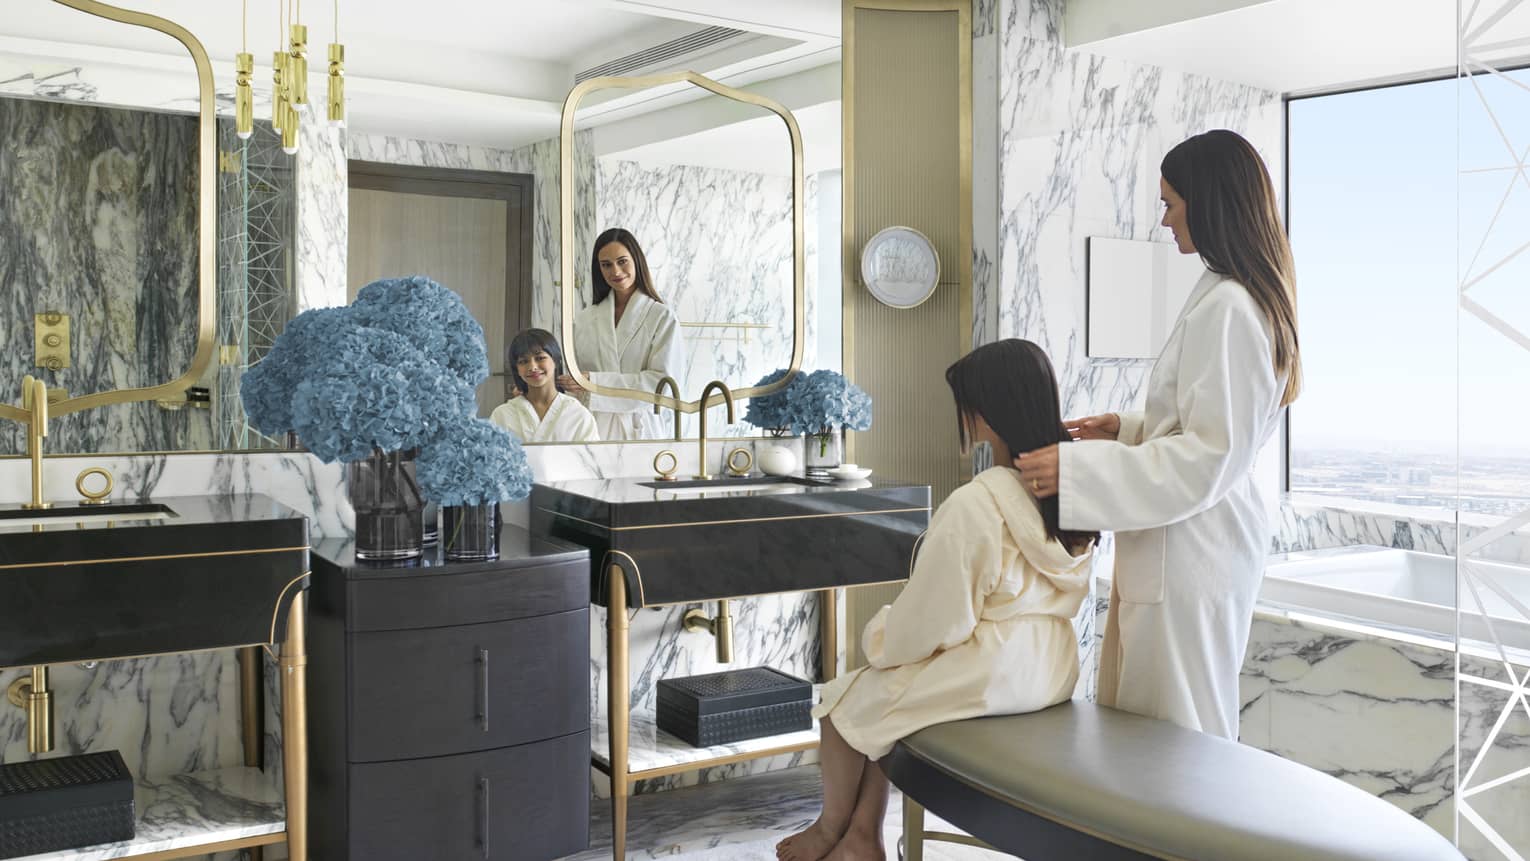 Woman and young girl in bathrobes sit in front of mirror in bathroom